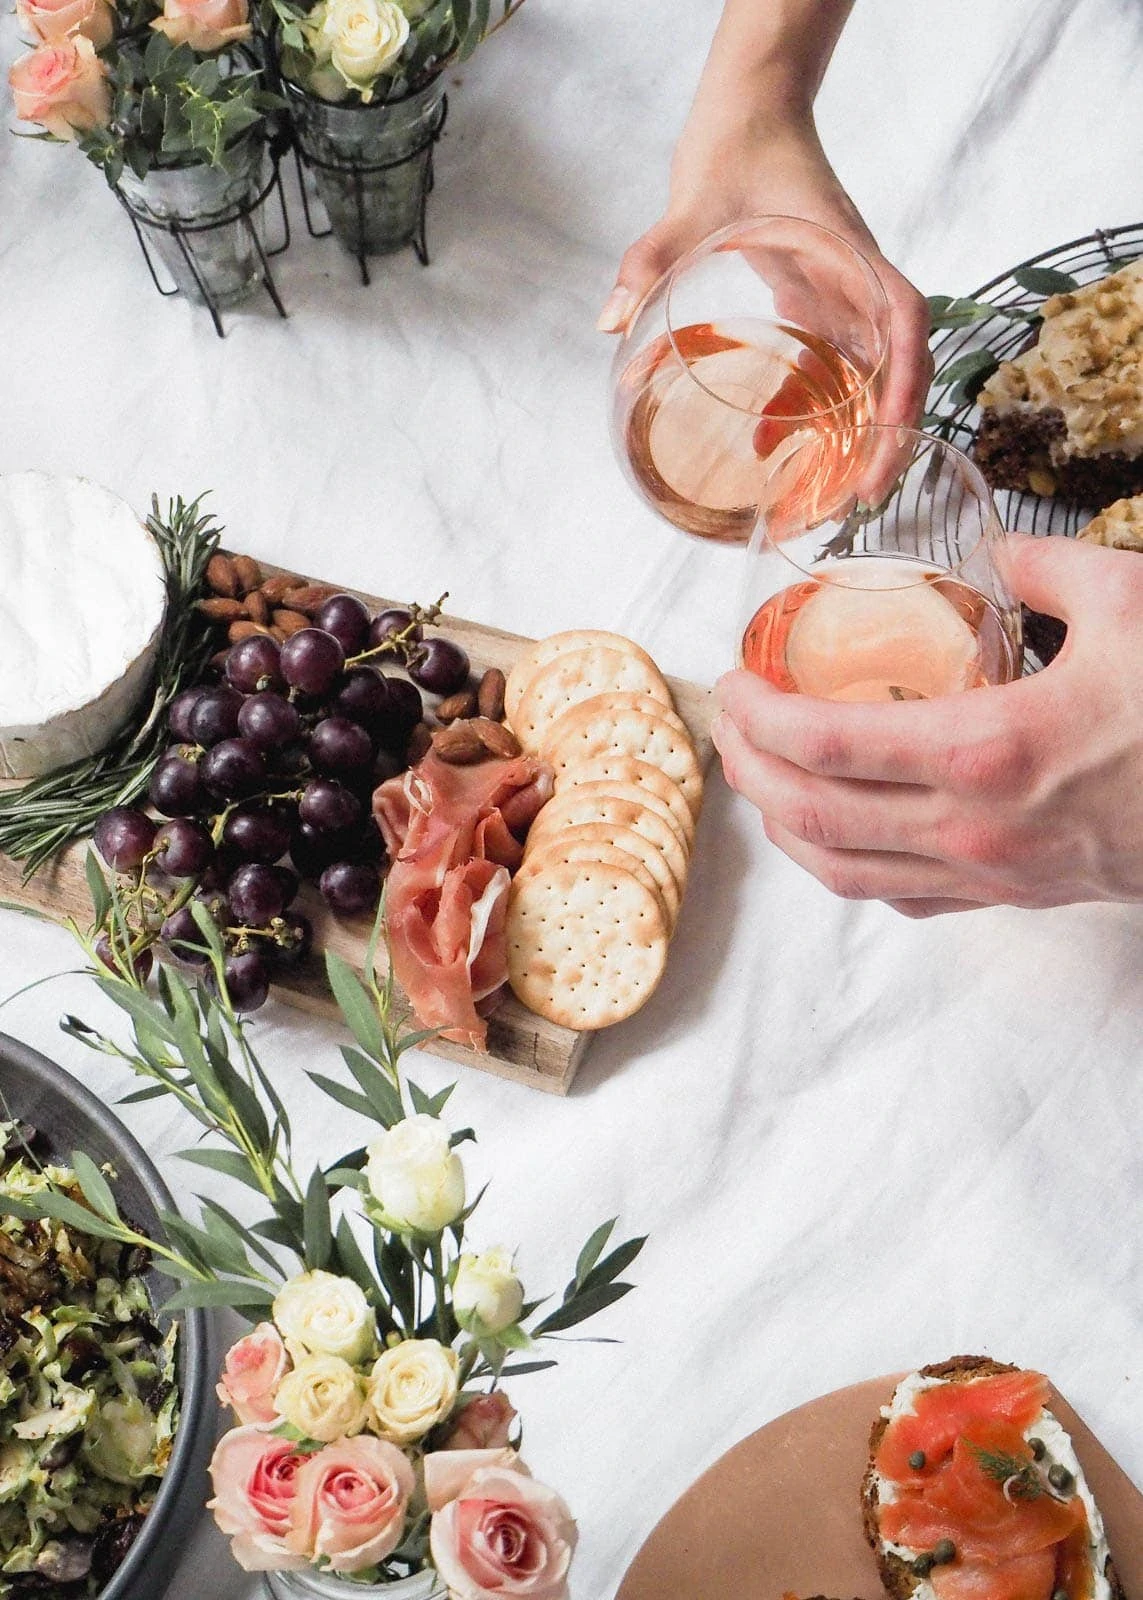 Staying in is the new going out. Especially when it involves an indoor picnic and your boo. Here are 5 steps to create the perfect indoor picnic date night!